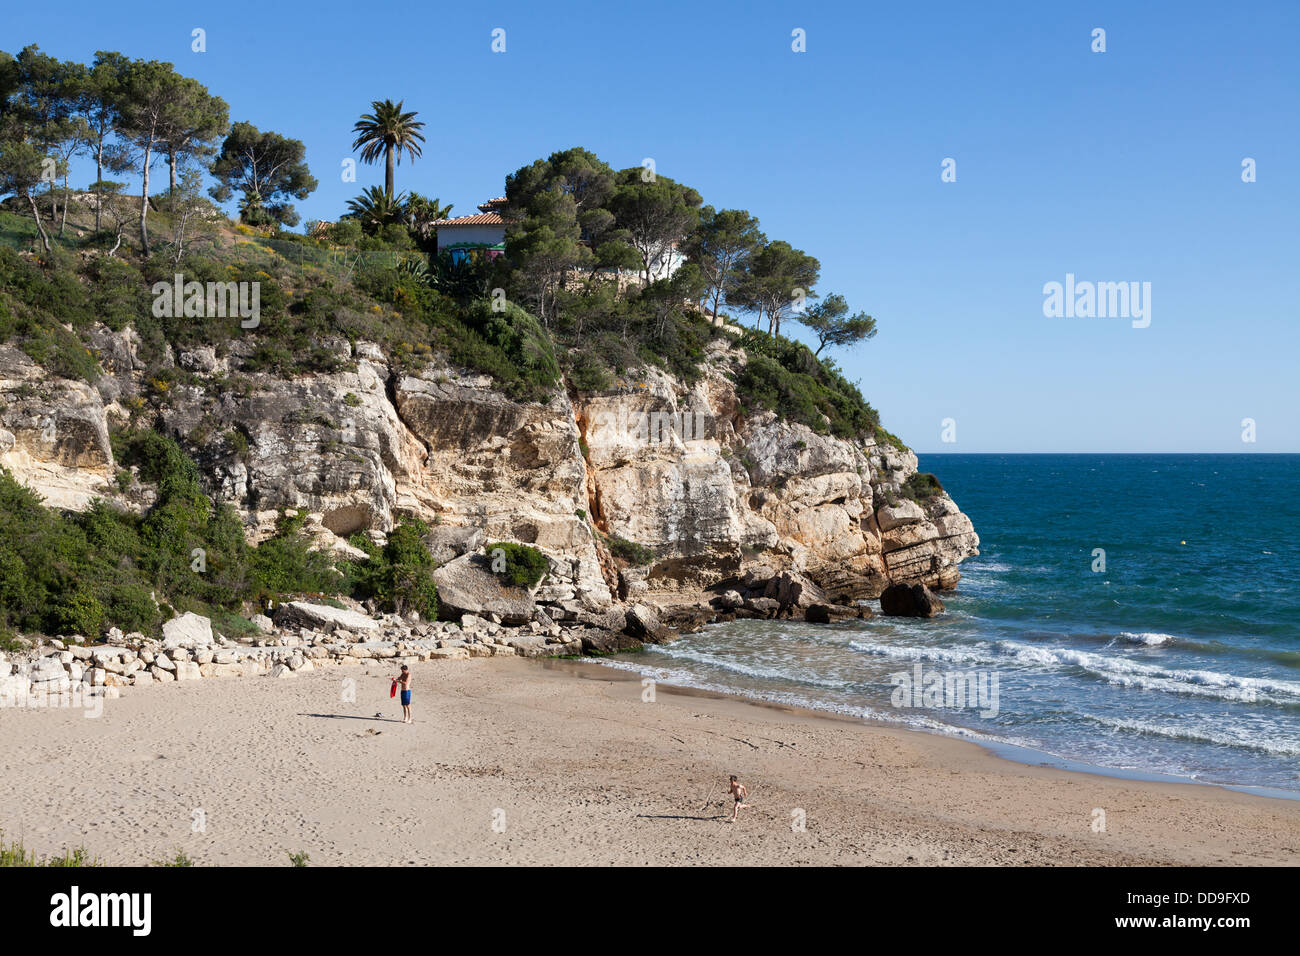 rocky inlet cove and beach of Cap Salou Stock Photo